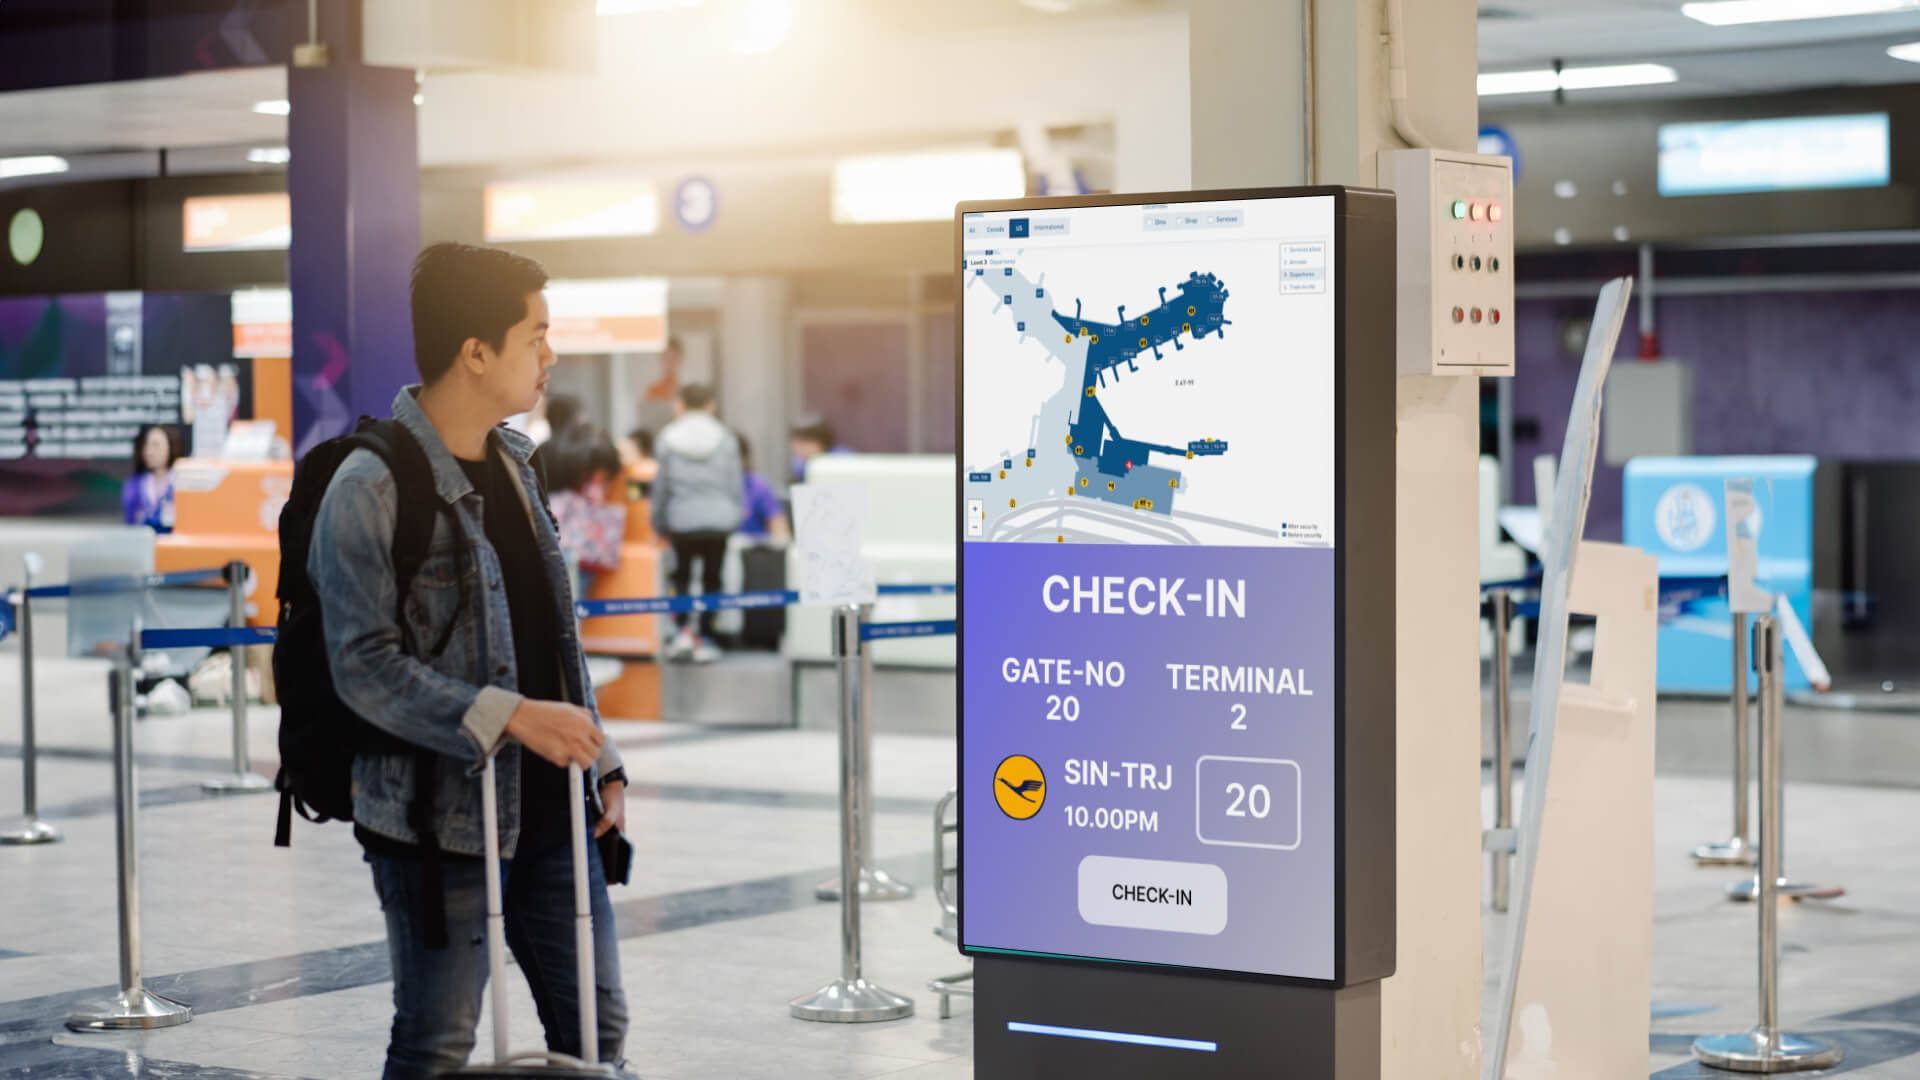  An airport wayfinding screen showing simple check-in details